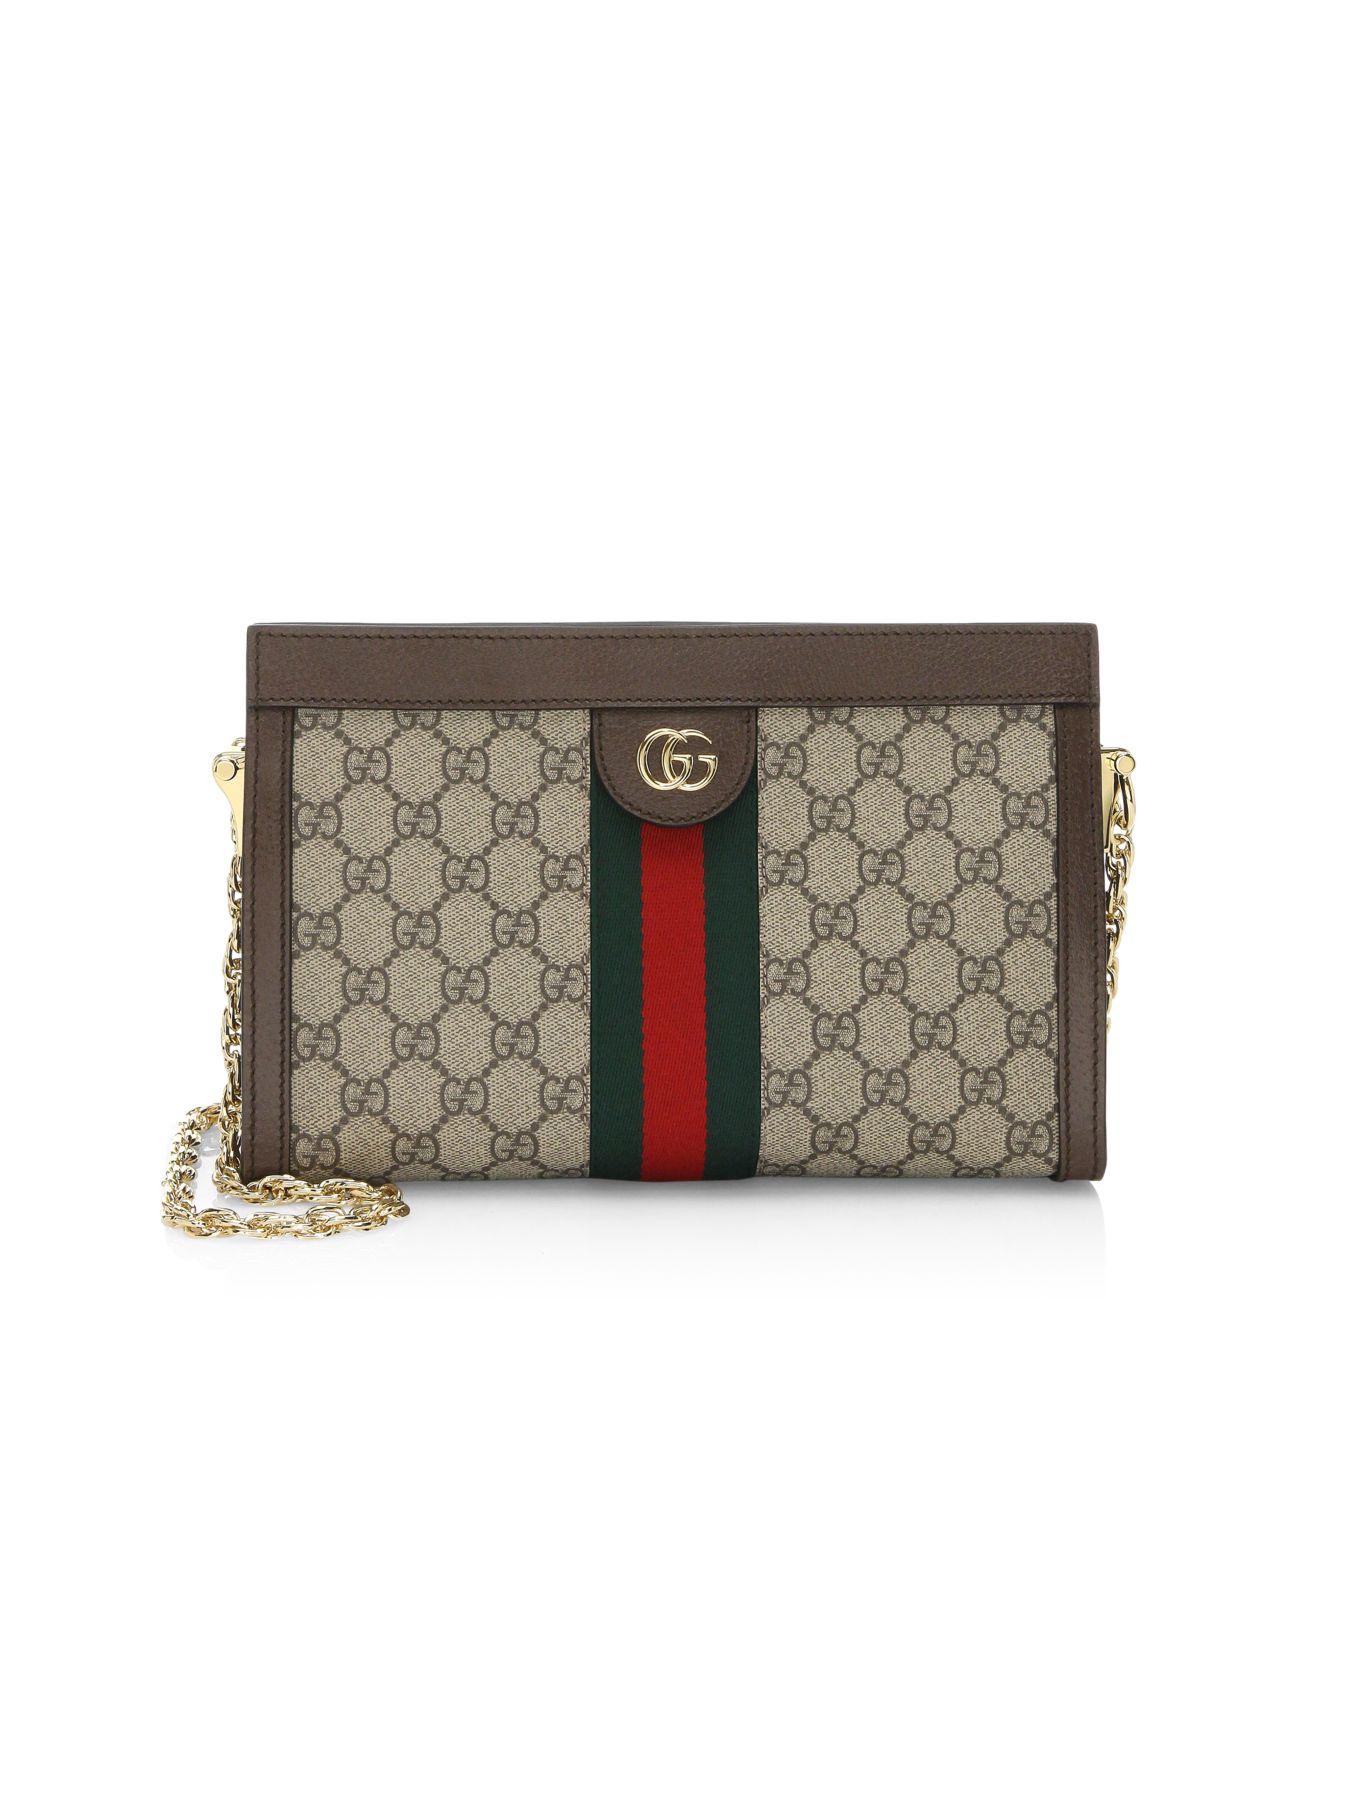 Gucci Ophidia Linea Dragoni Small GG Supreme Canvas Chain Shoulder Bag in Beige (Brown) - Lyst